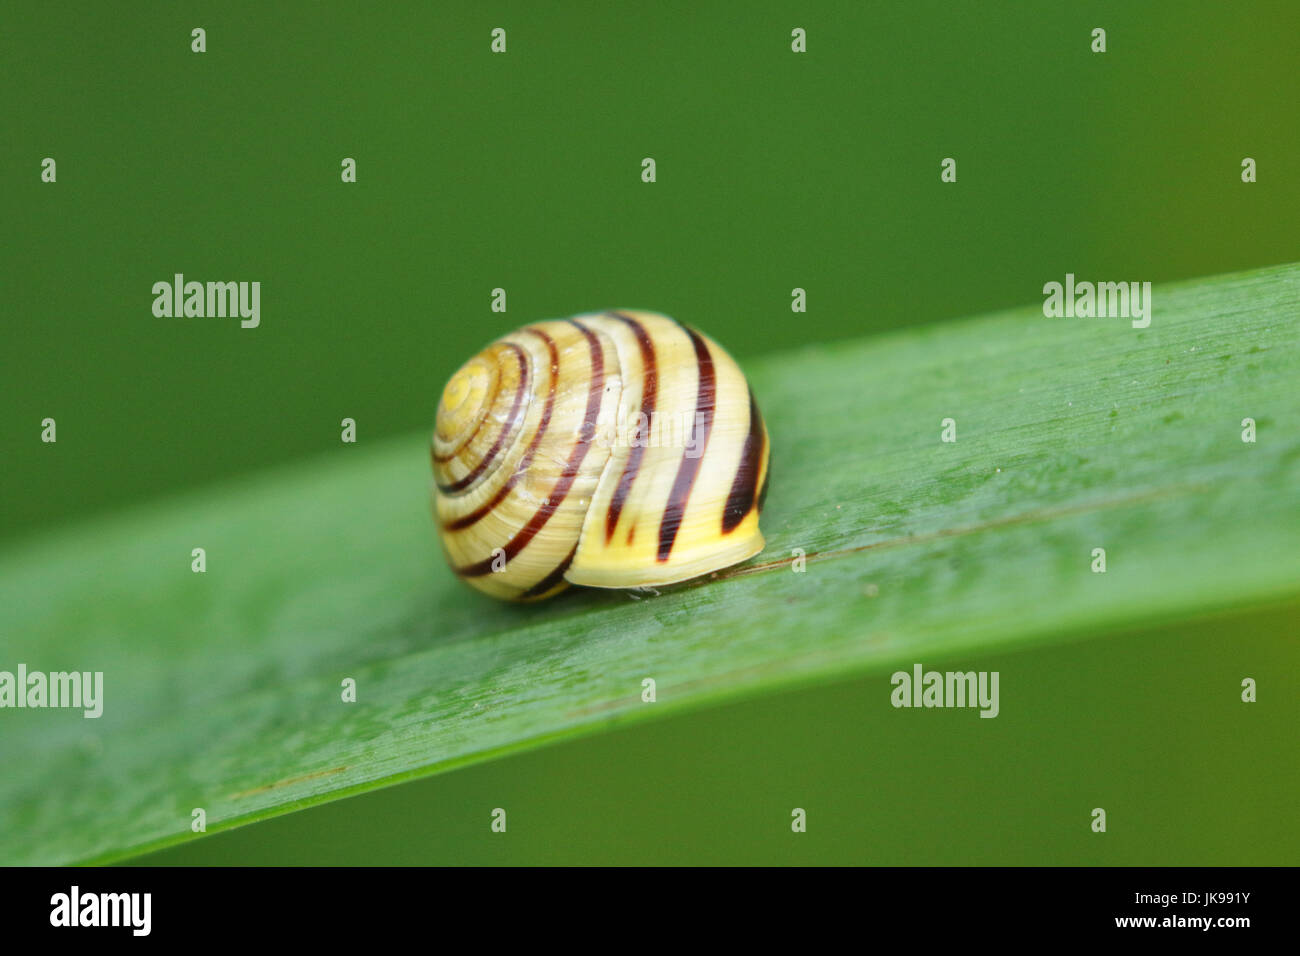 Snail with striped shell on a leaf in the garden Stock Photo